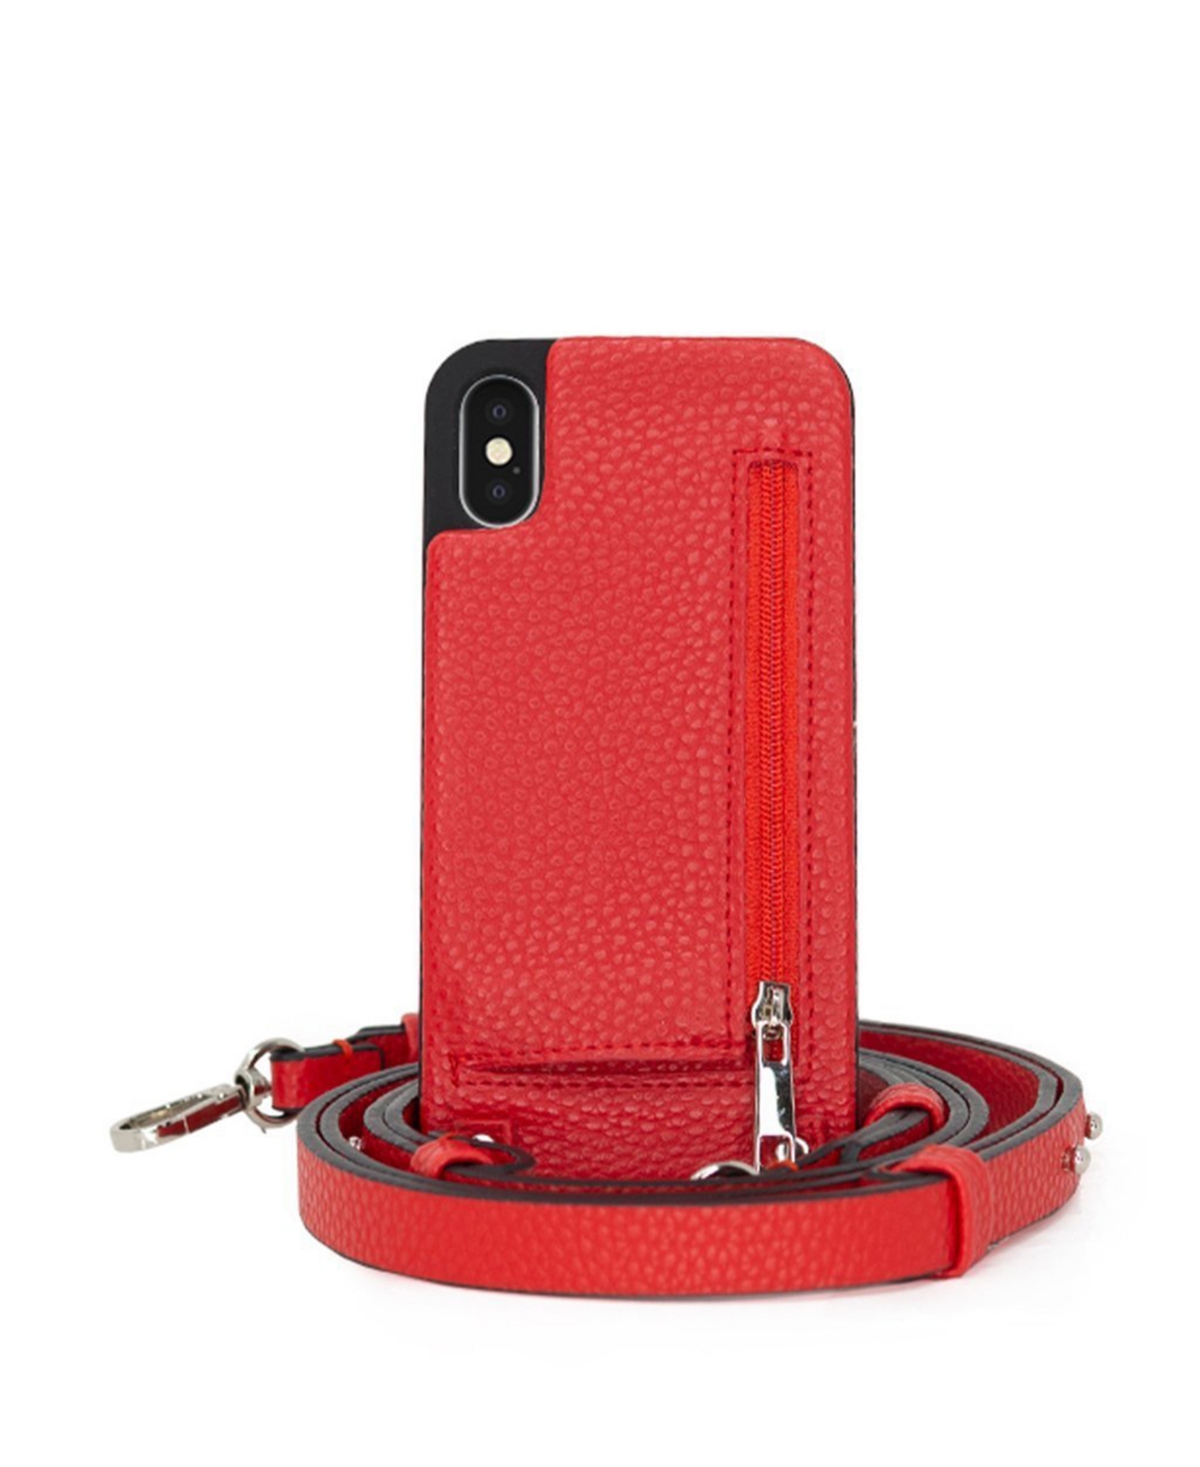 Hera Cases Crossbody Xs Max IPhone Case with Strap Wallet